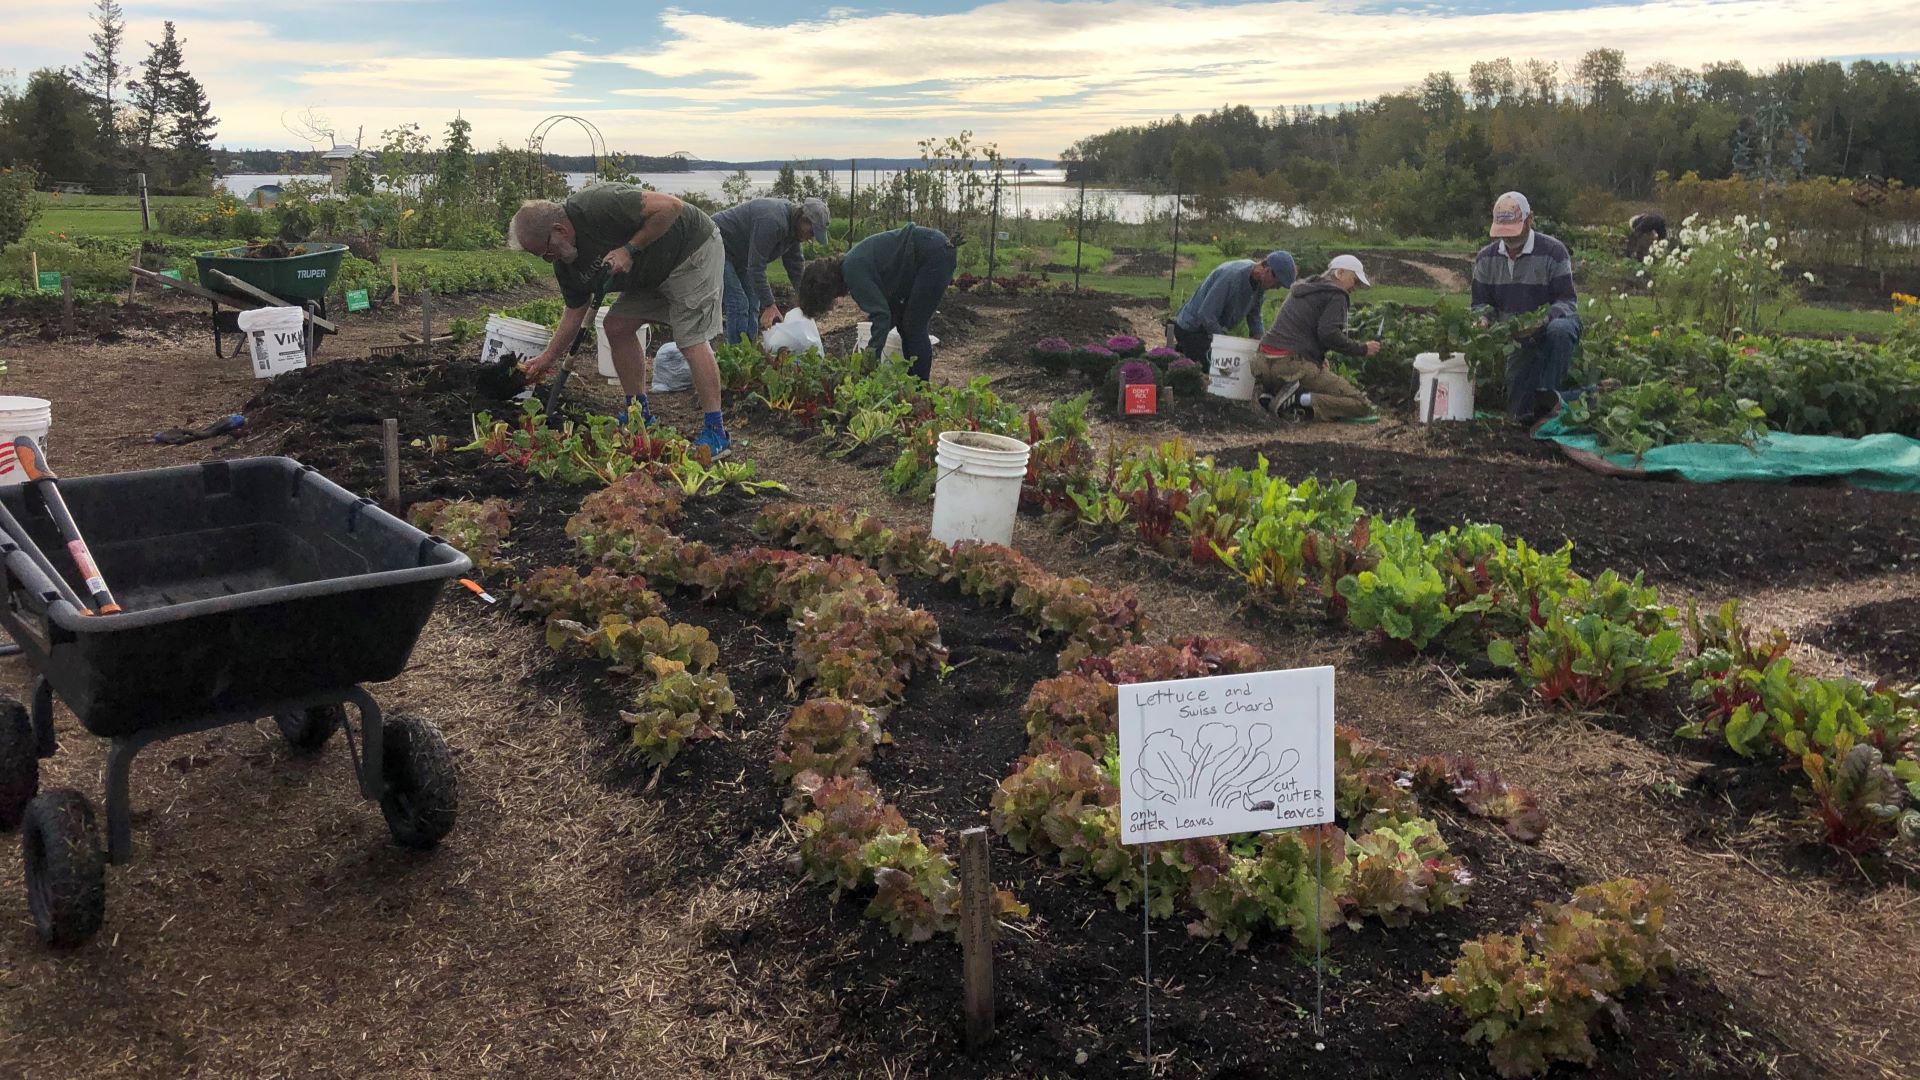 Gardening our way to greater community resilience